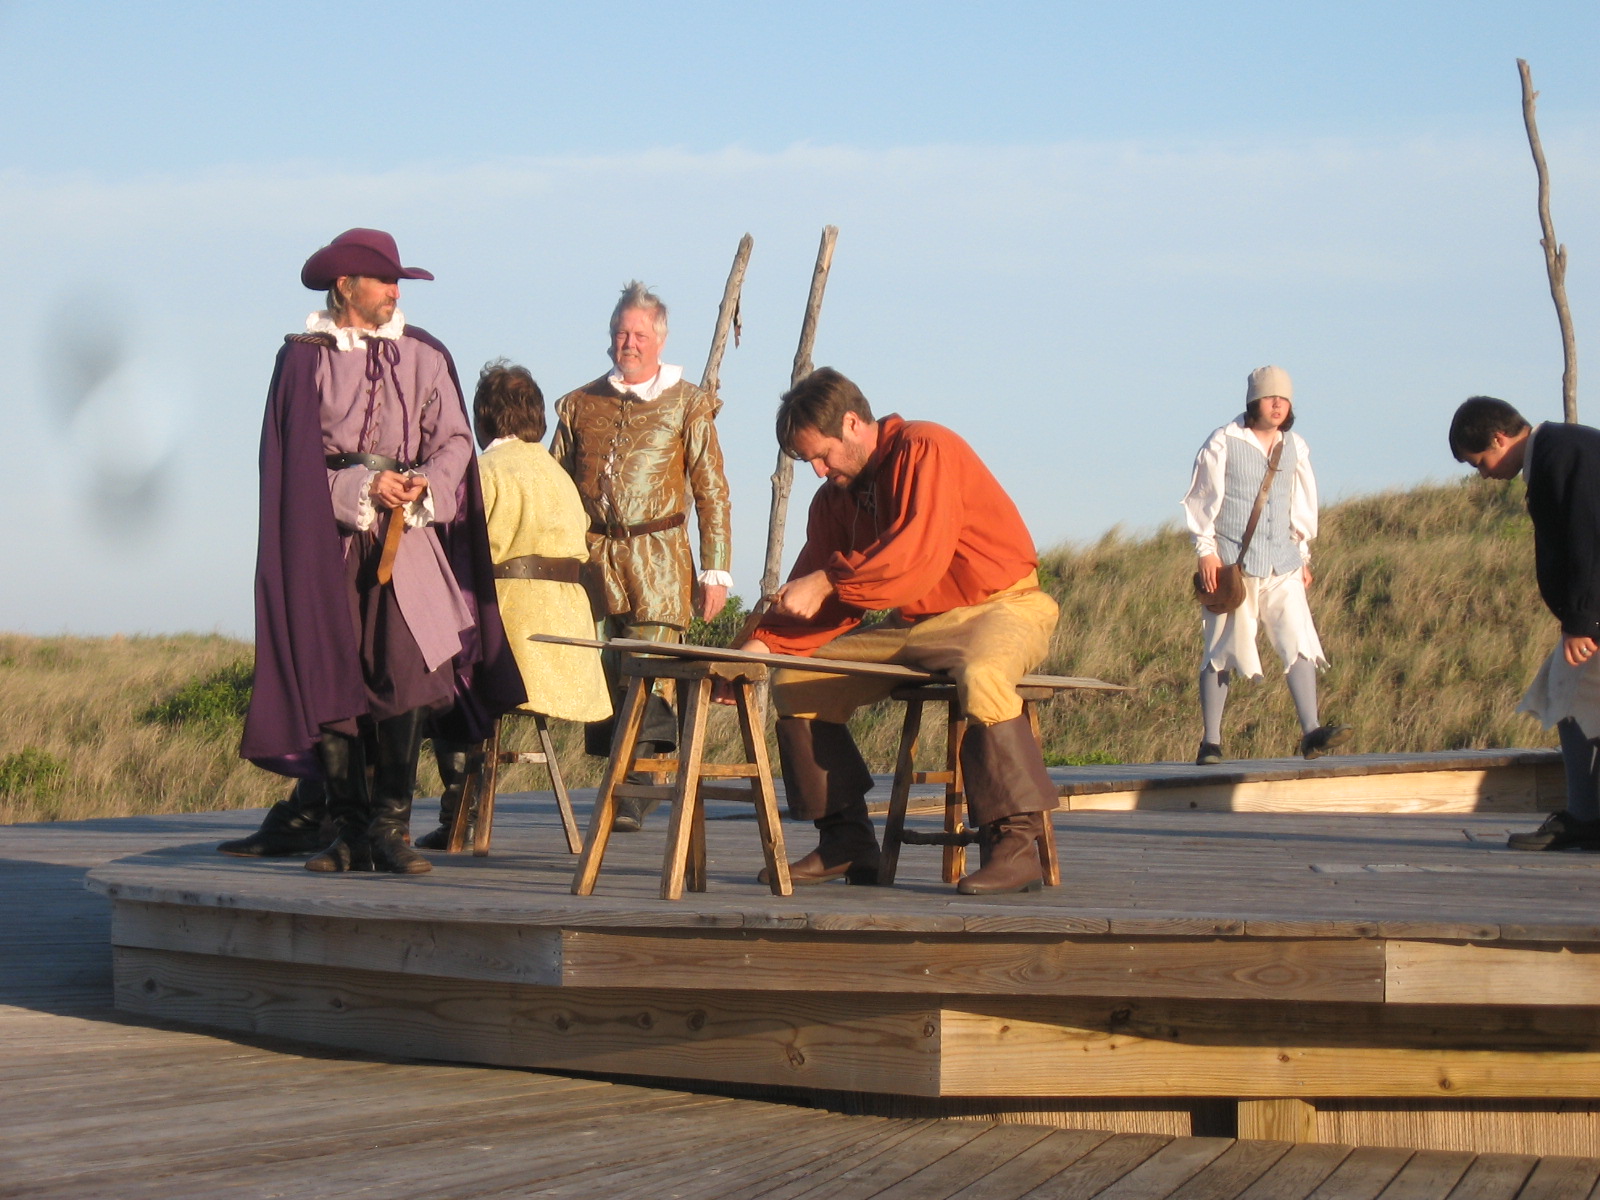 Scott Rollins as Capt. John Smith in the outdoor drama 1607:FIRST LANDING at Fort Story Virginia Beach VA 2009